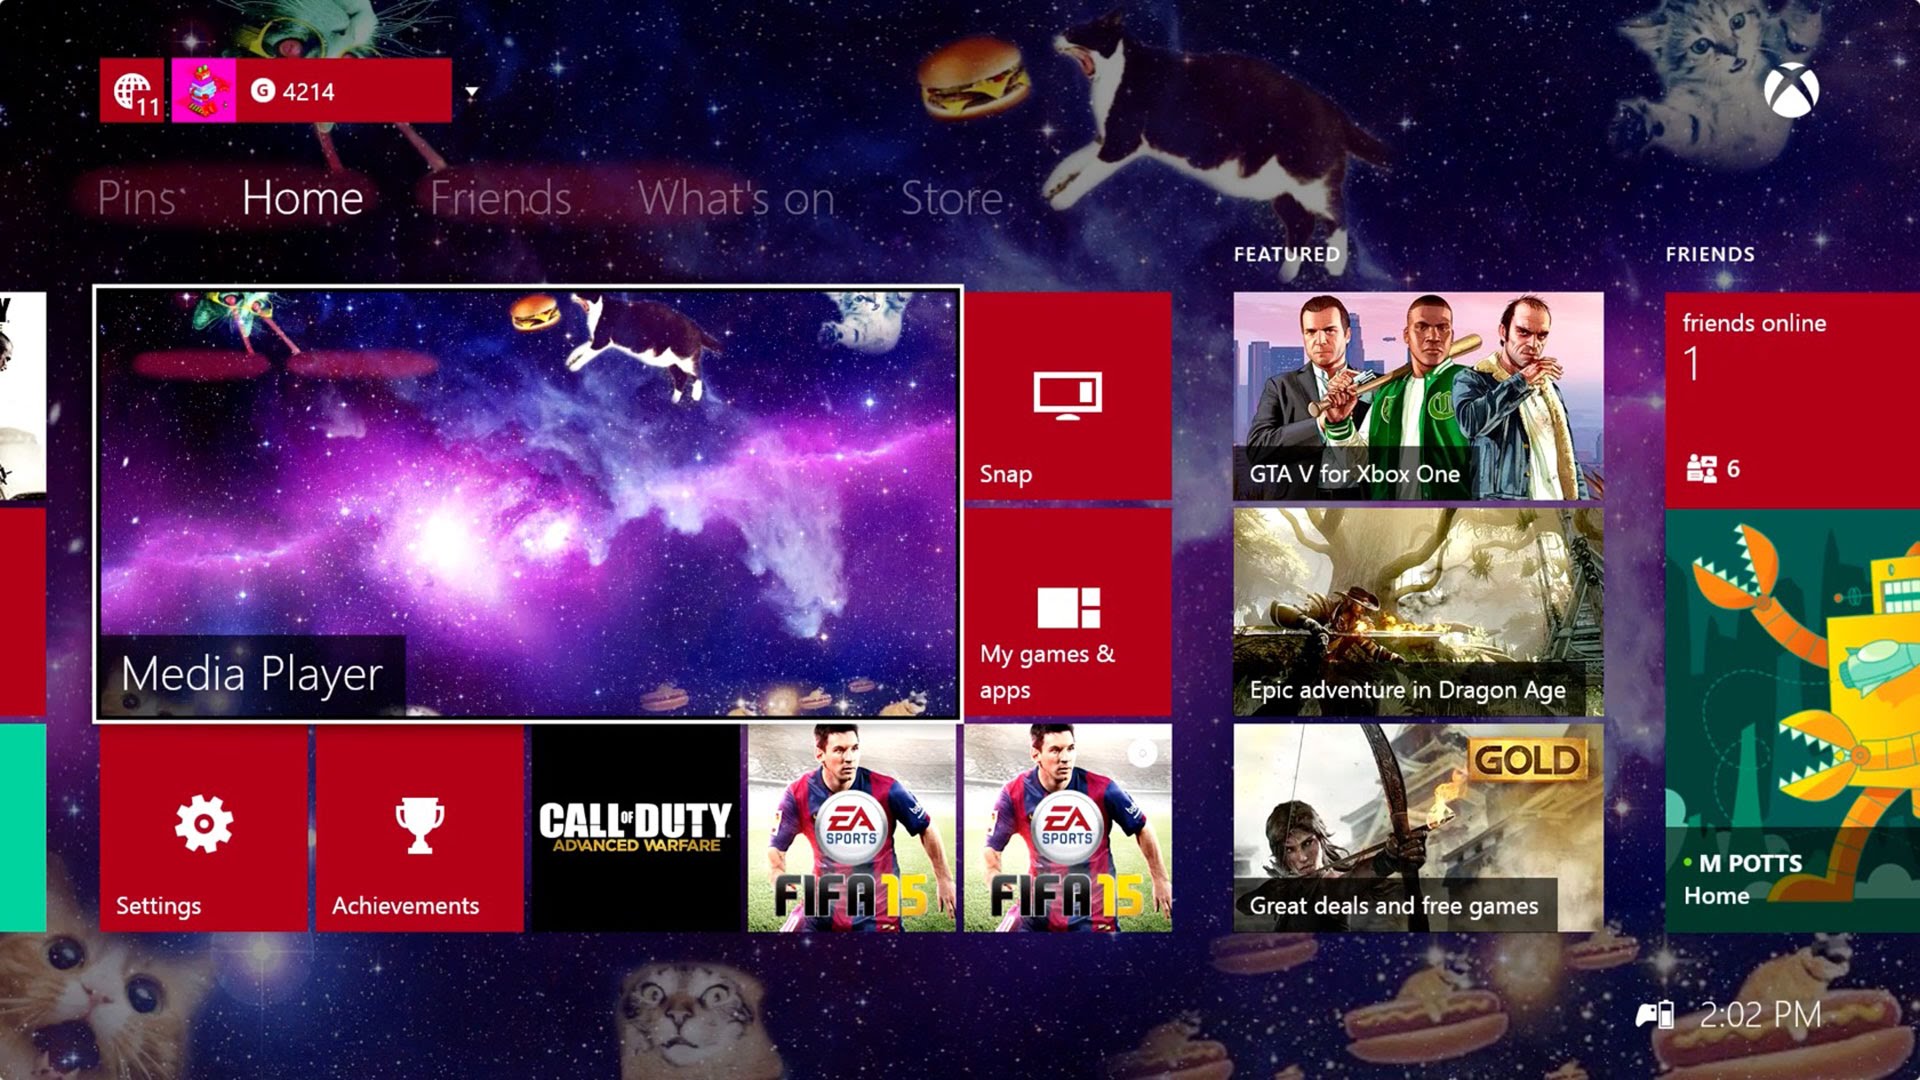 How To Change The Background Of Your Xbox One Dashboard